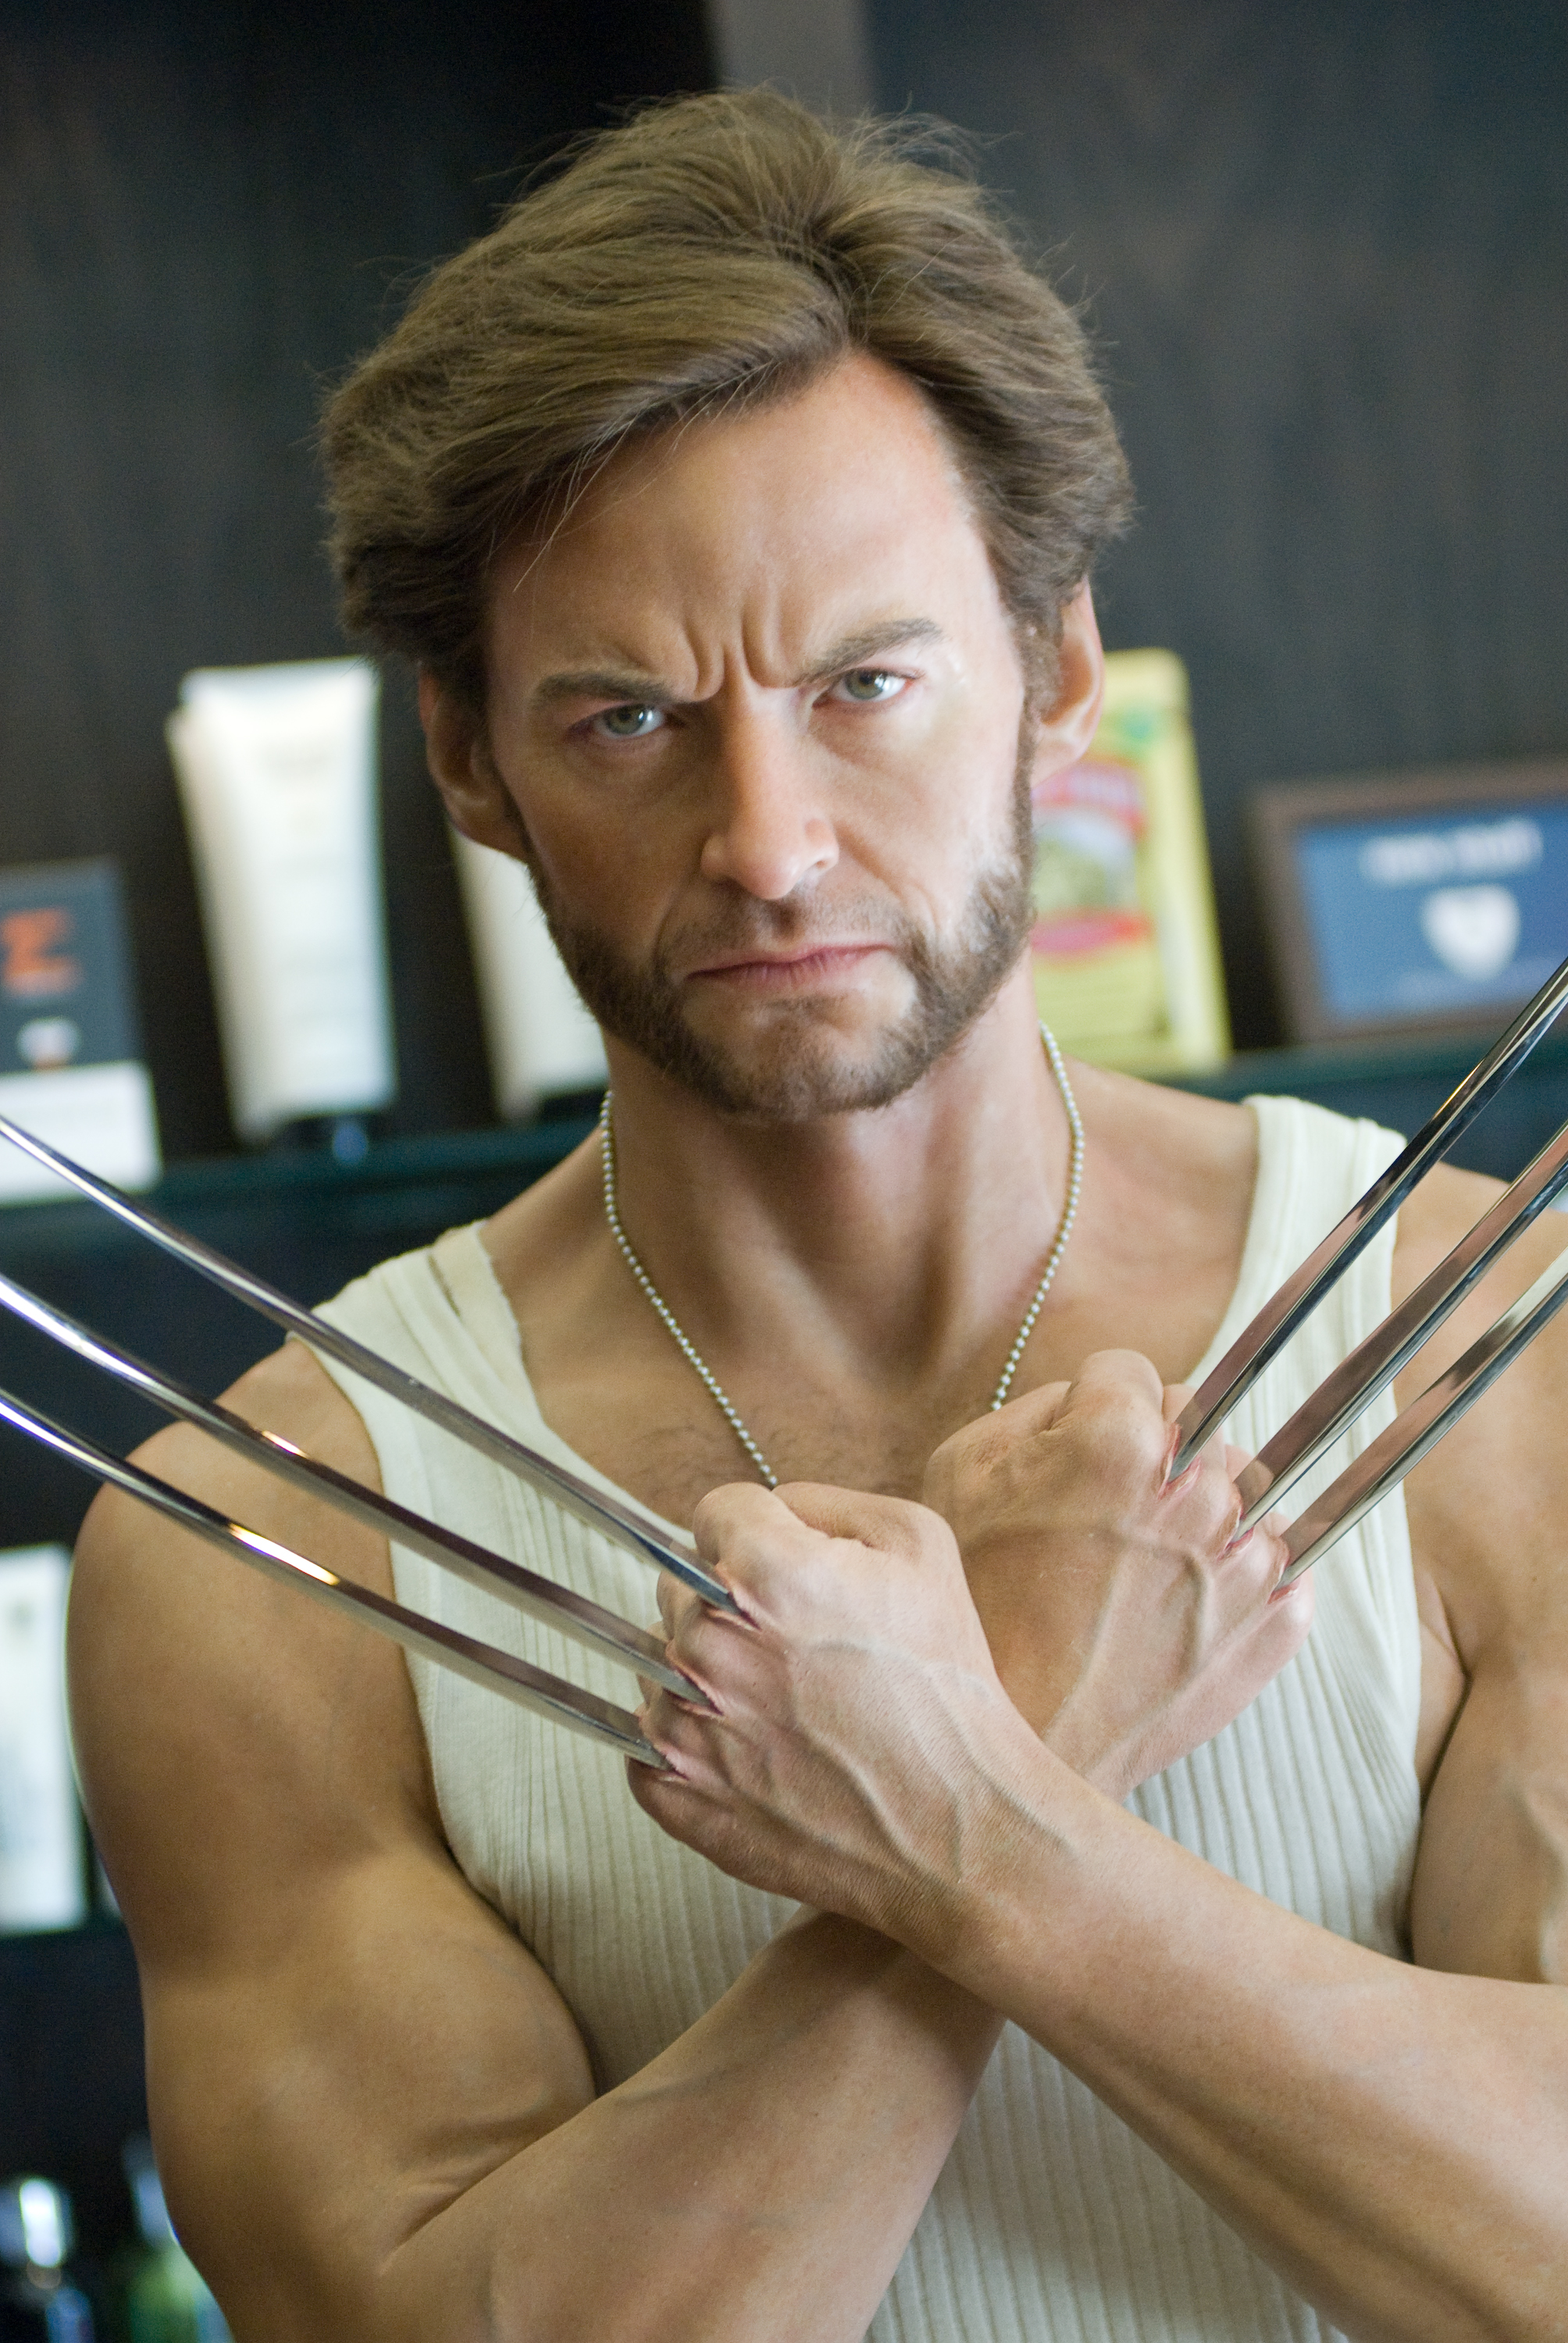 The Madame Tussauds Wolverine figure in Washington, DC on August 27, 2009 | Source: Getty Images